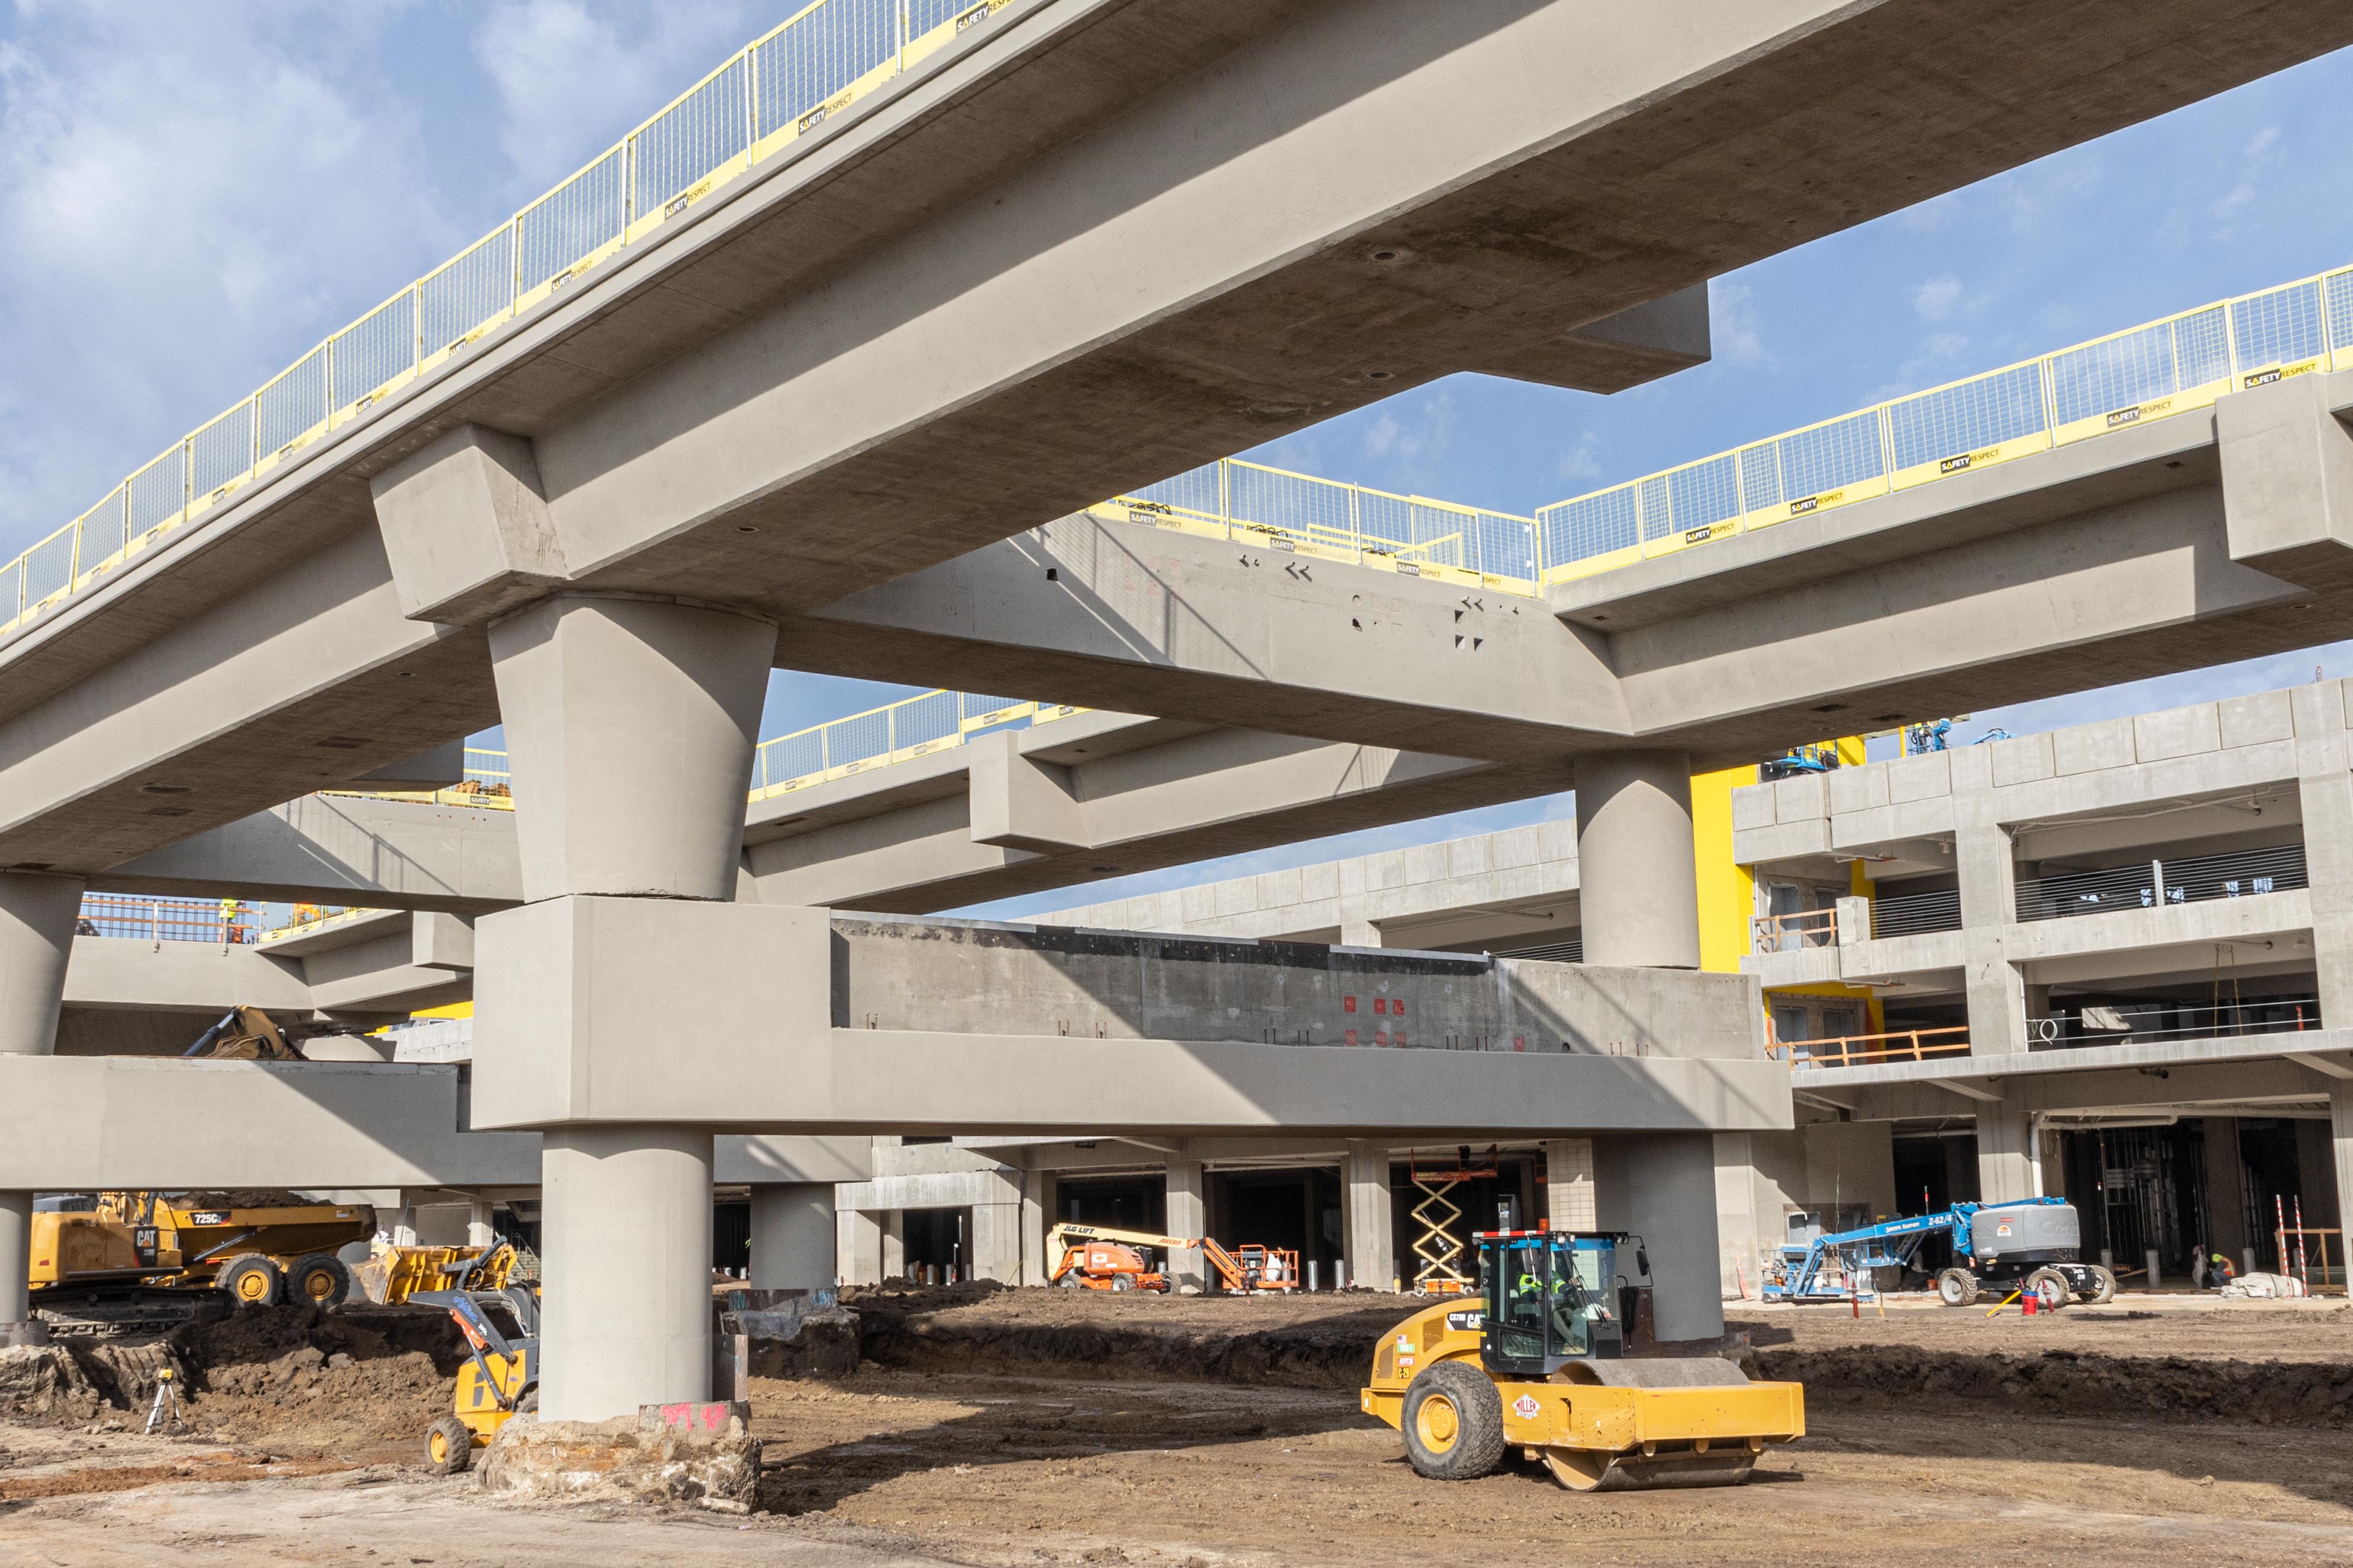 With the guideway superstructure in place, construction can begin on the future ITF-West station.